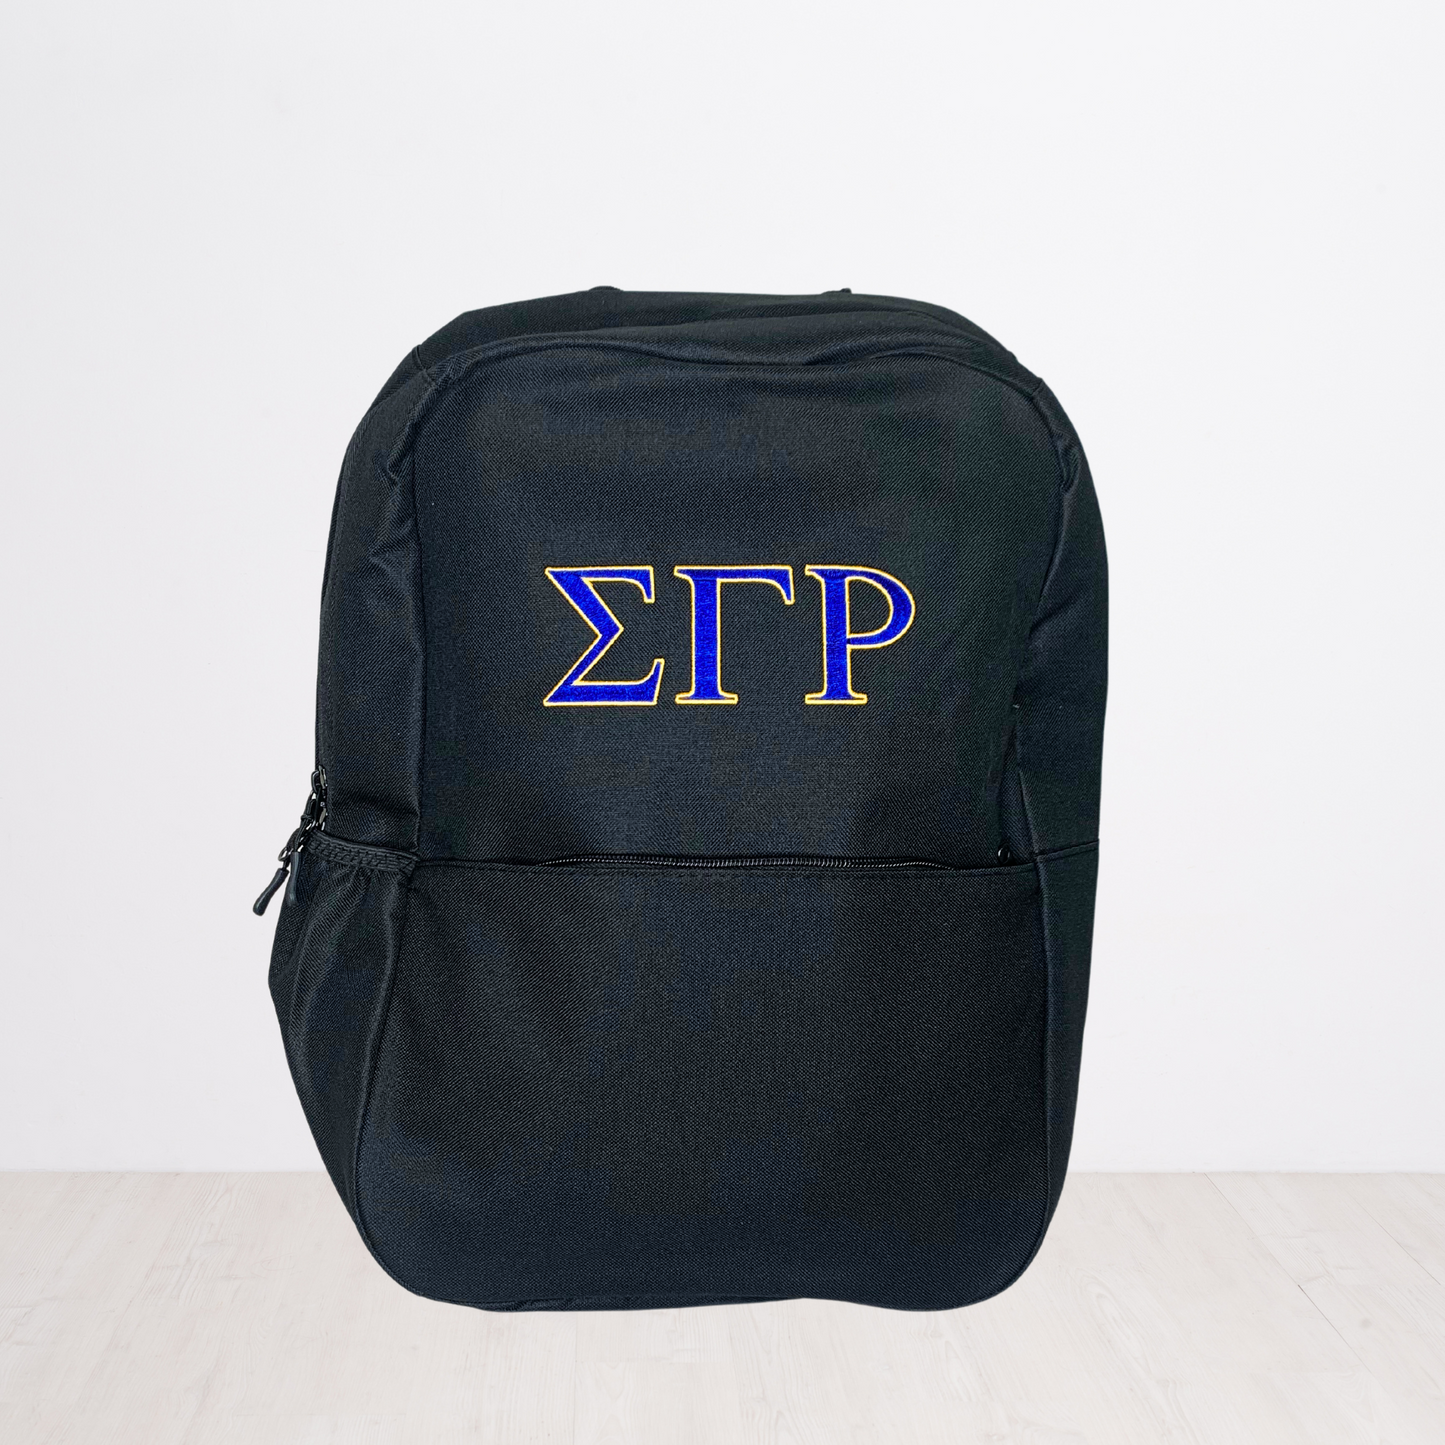 Sigma Gamma Rho Personalized Embroidered Backpack Bookbag